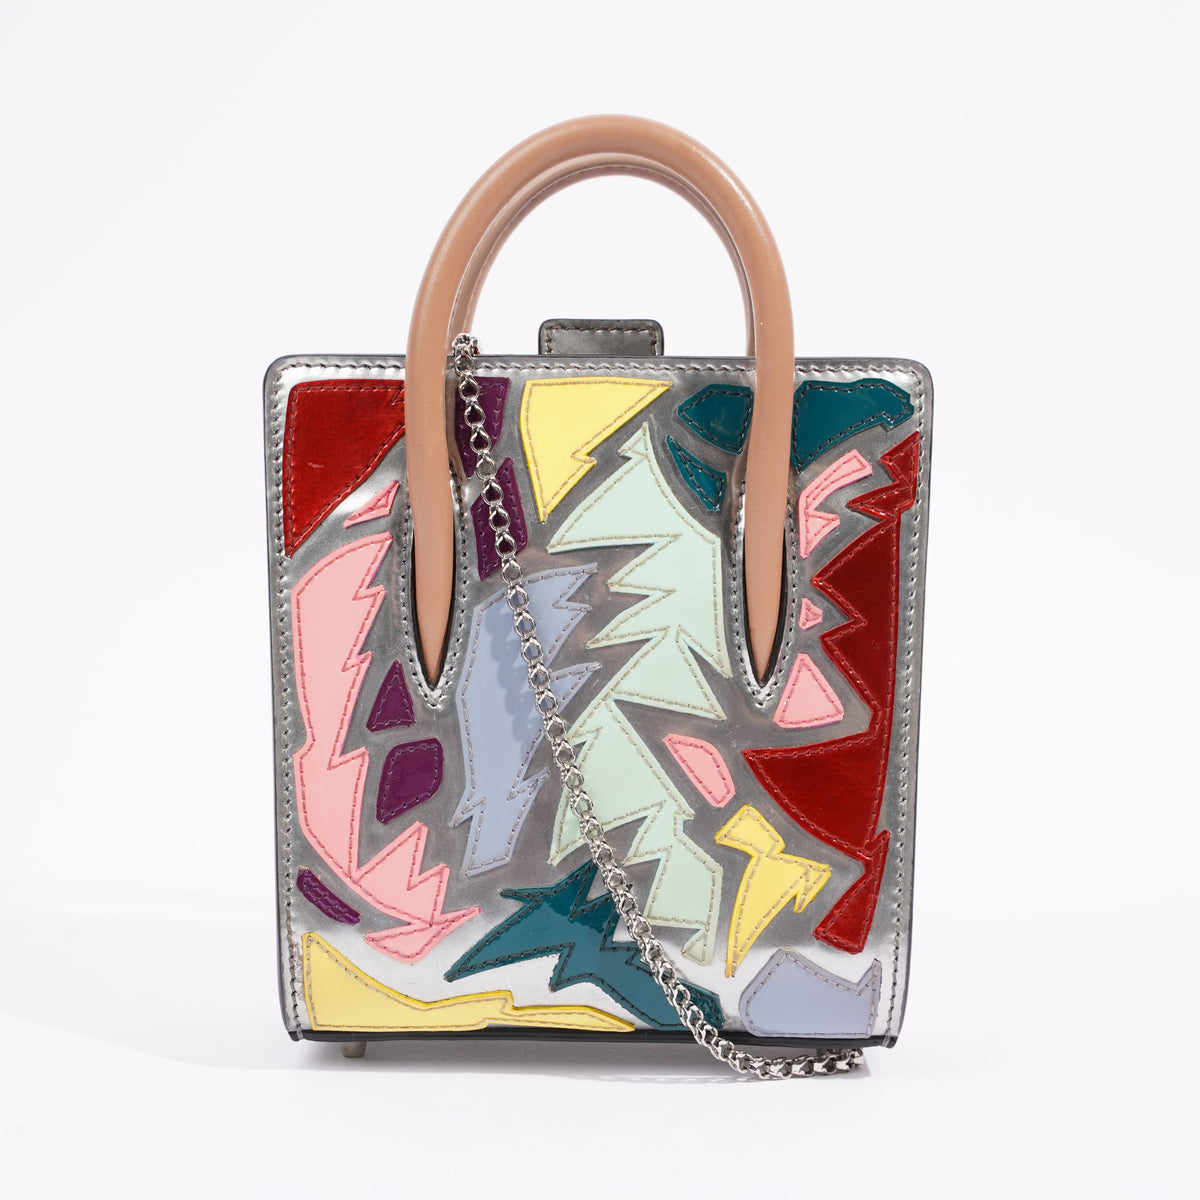 We Want ALL of These Christian Louboutin Paloma Totes!